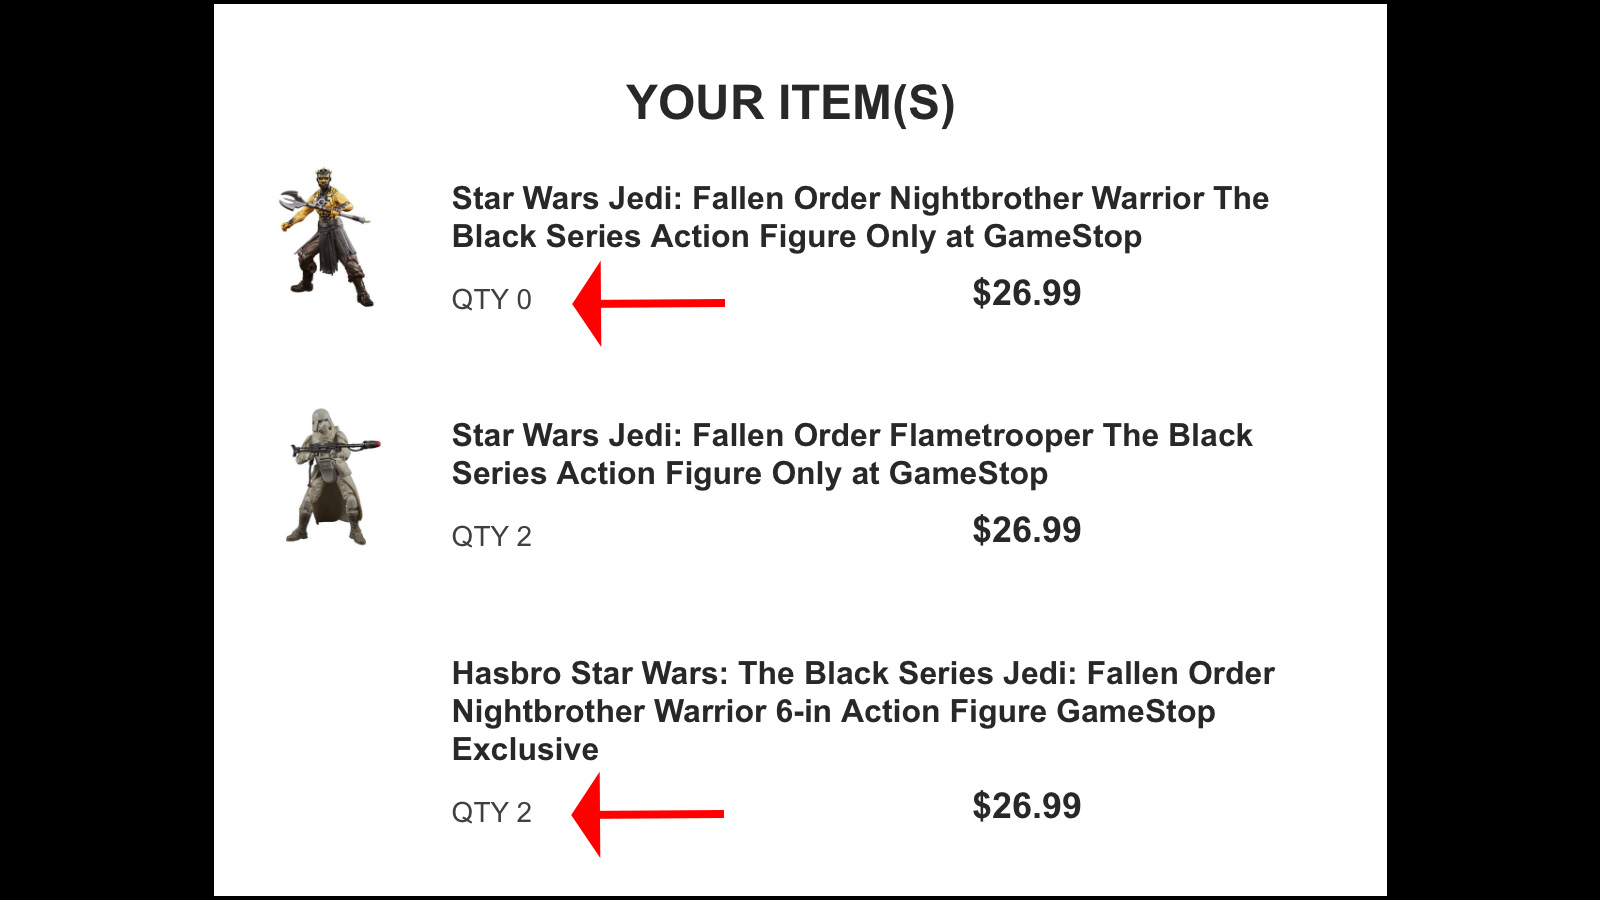 Not Cancelled? - Game Stop Exclusive TBS 6-Inch Gaming Greats Jedi: Fallen Order Nightbrother Warrior Preorders